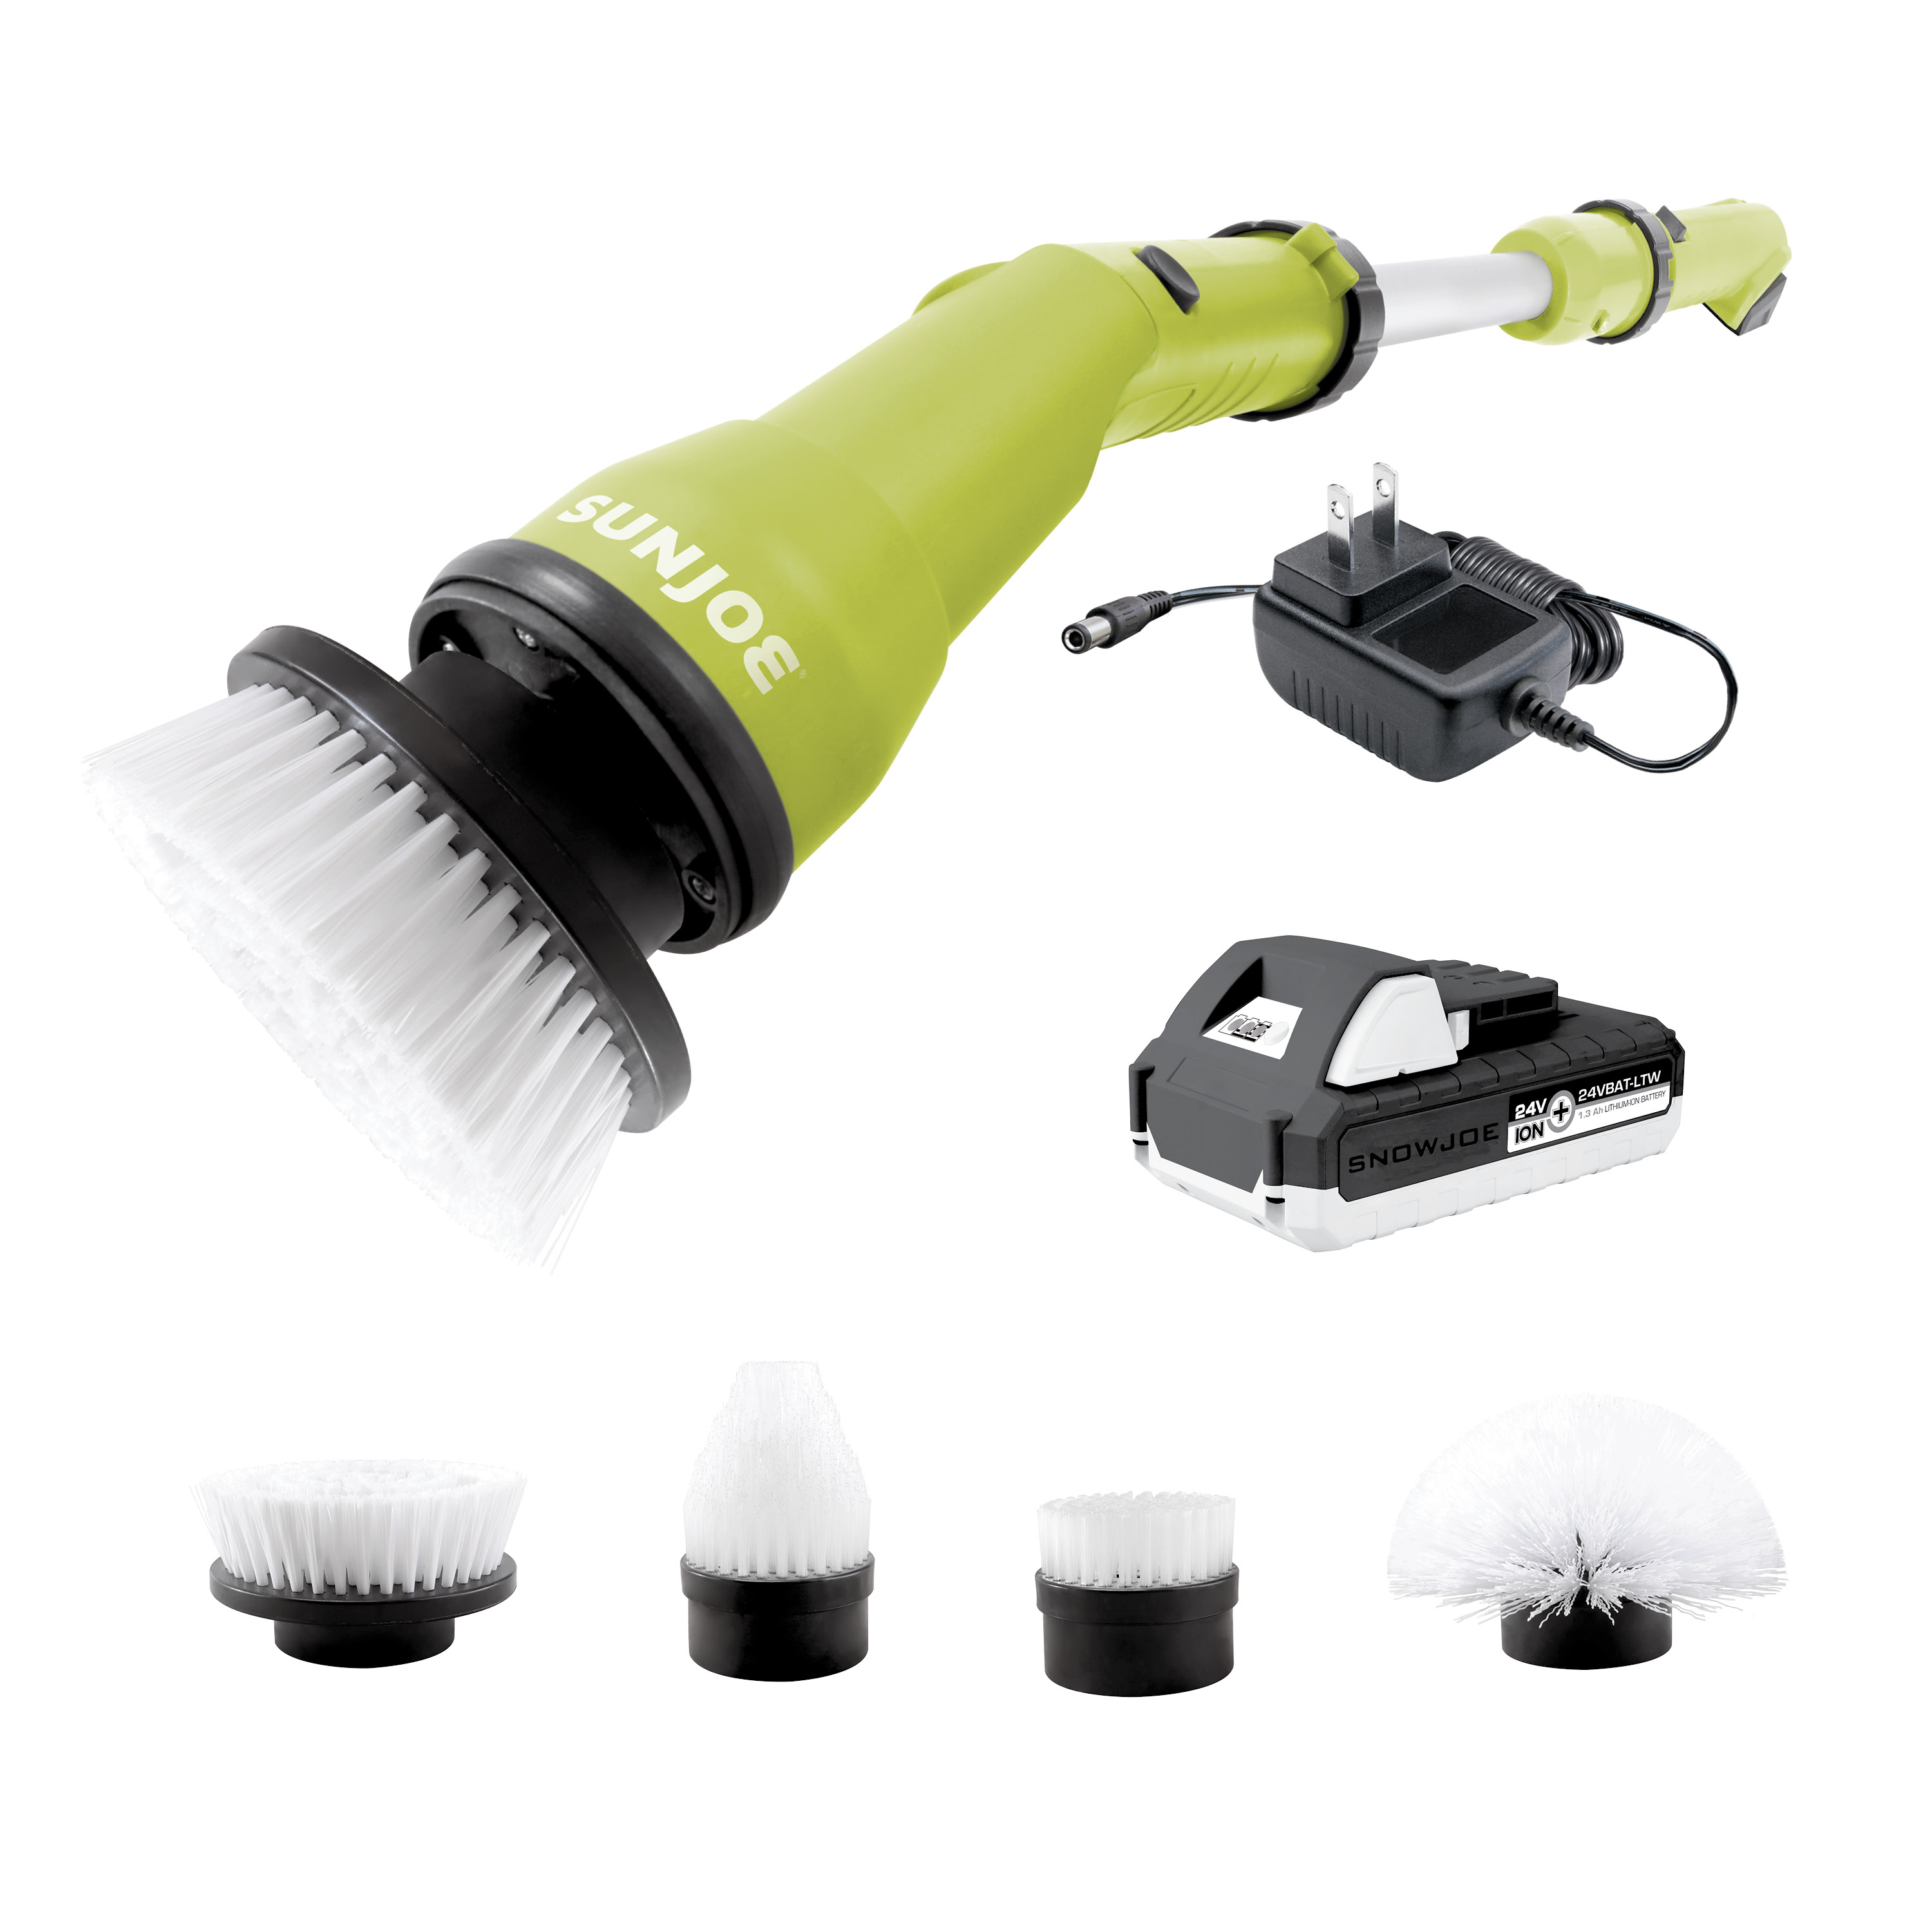 JOW 4 in 1 Detachable 180 Degree Foldable Shower Scrubber Brush for Cleaning ASA